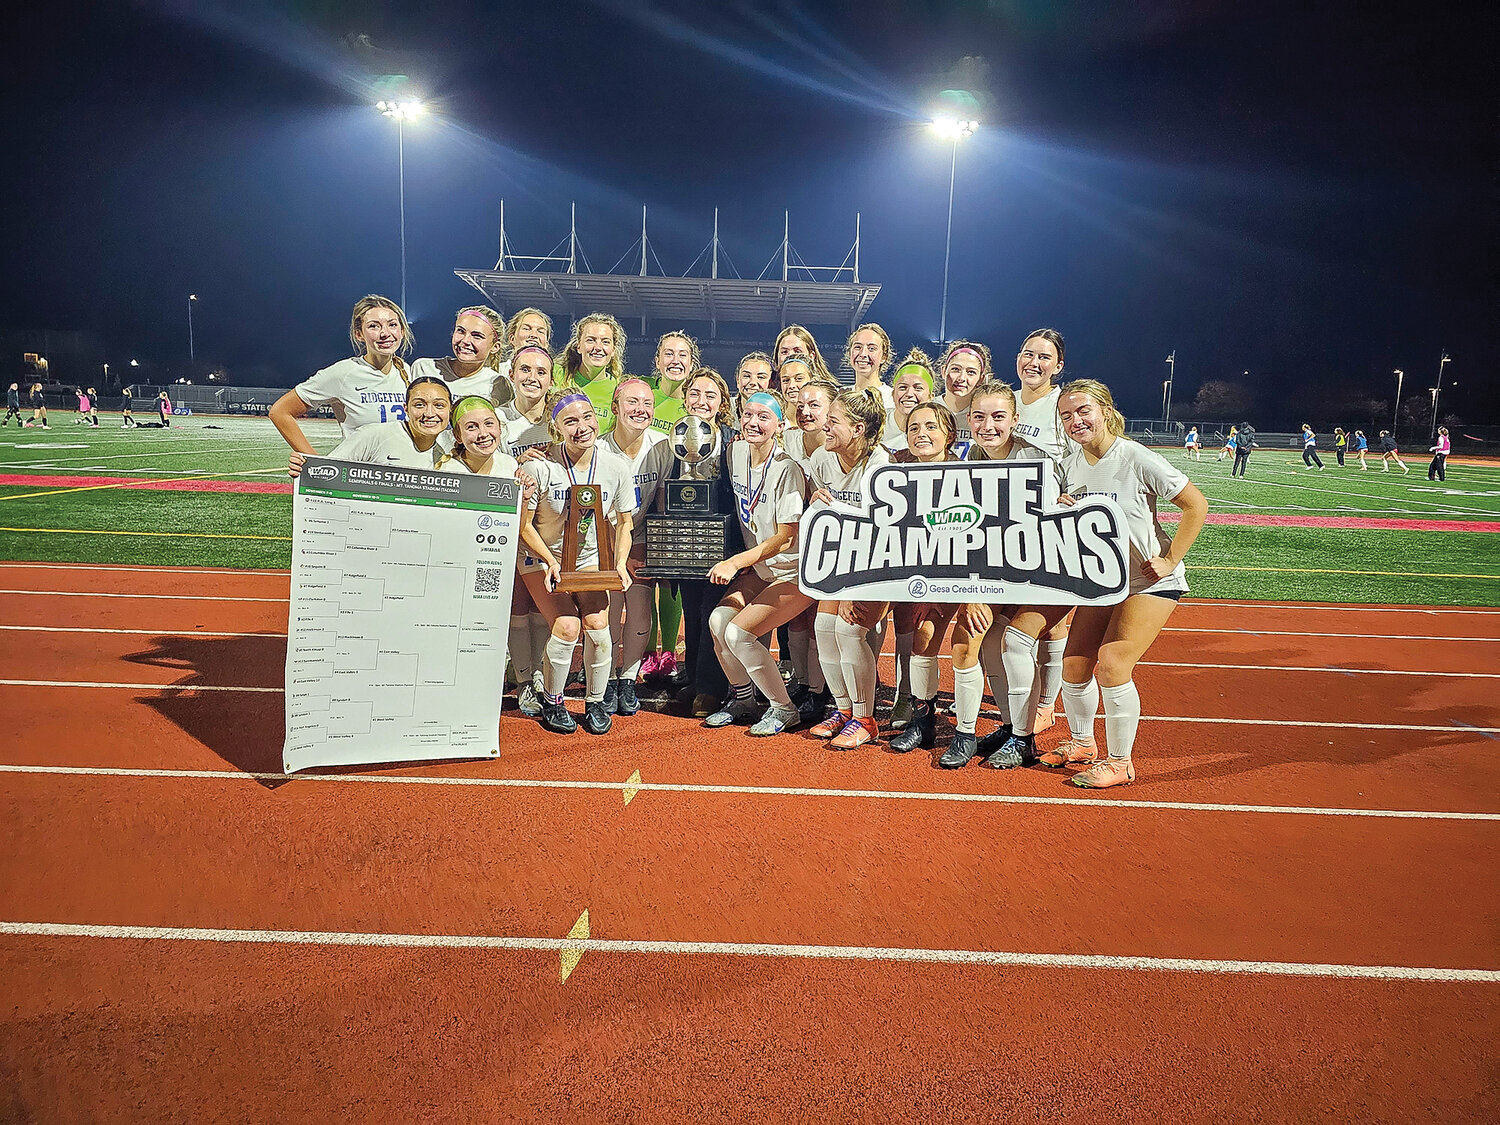 On Saturday, Nov. 18, the Spudders girls soccer team won the 2A state championship over West Valley High School of Spokane 3-2 after winning in penalty kicks.